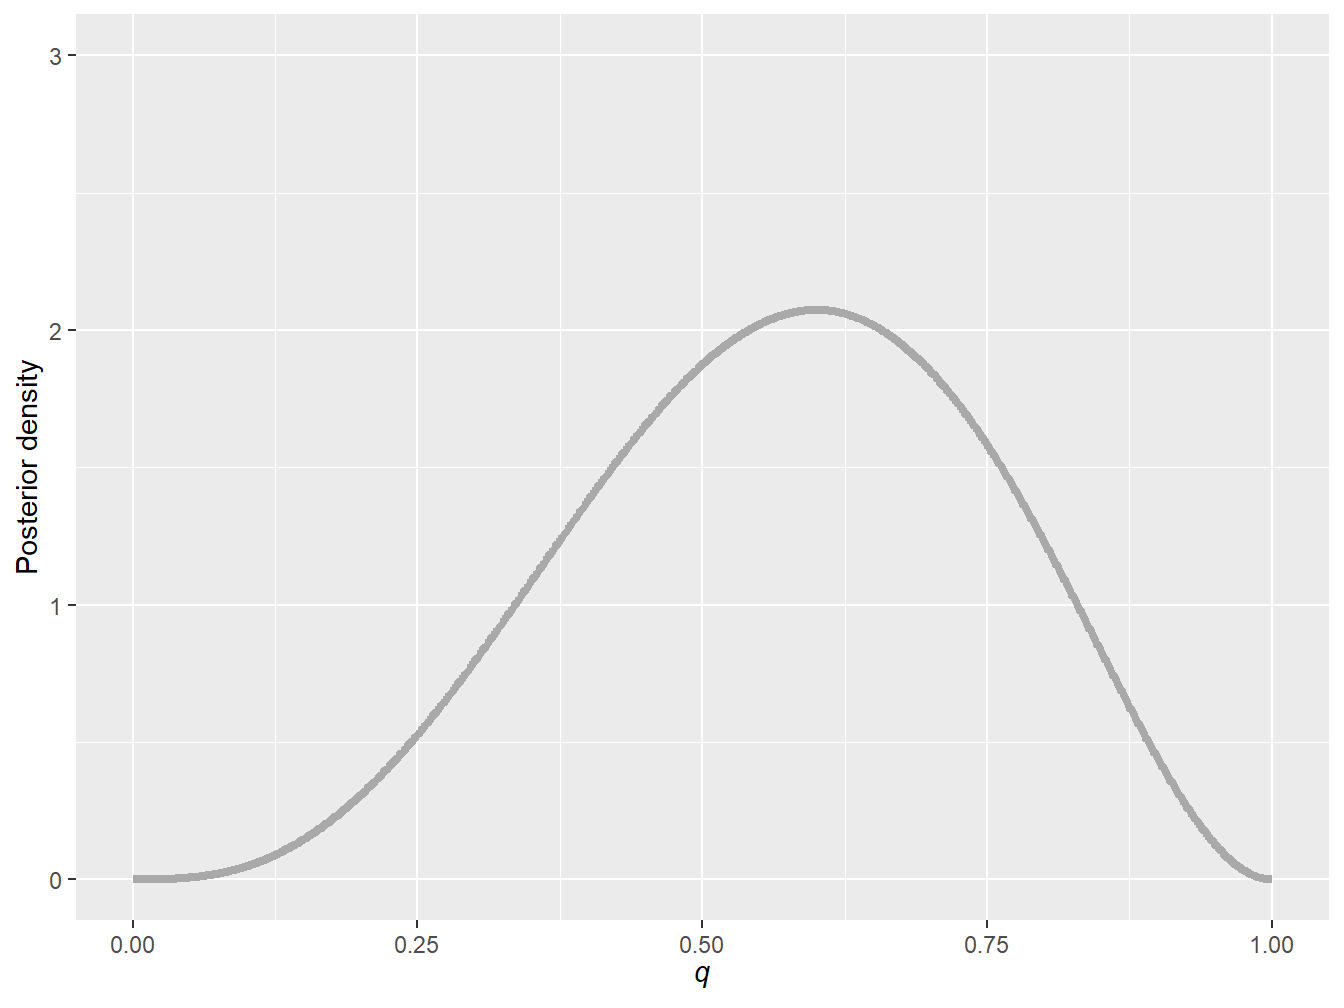 Posterior probability density function of parameter \(q\) for a sample of five data points